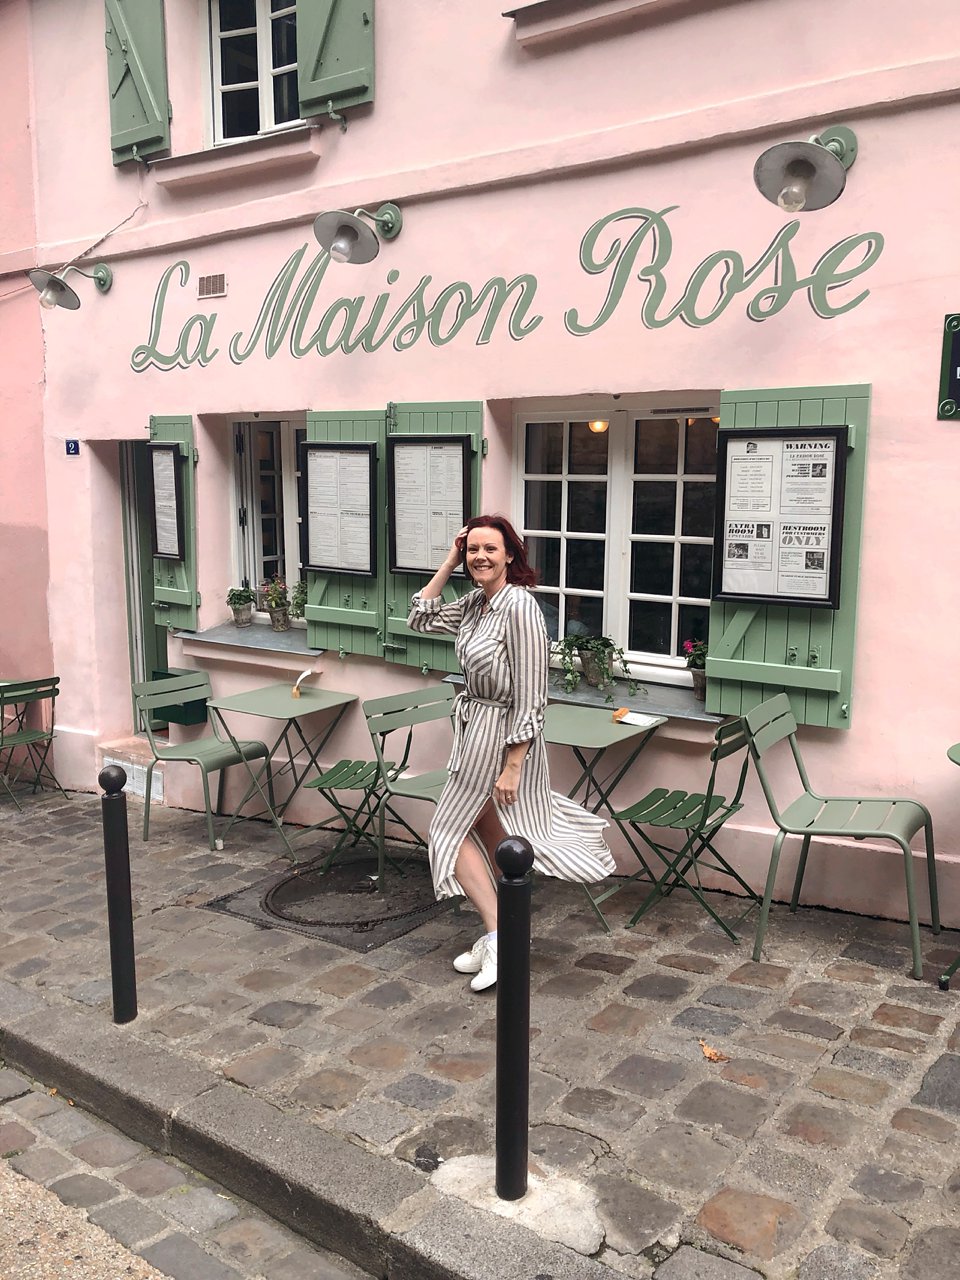 5 days in paris france detailed itinerary le maison rose